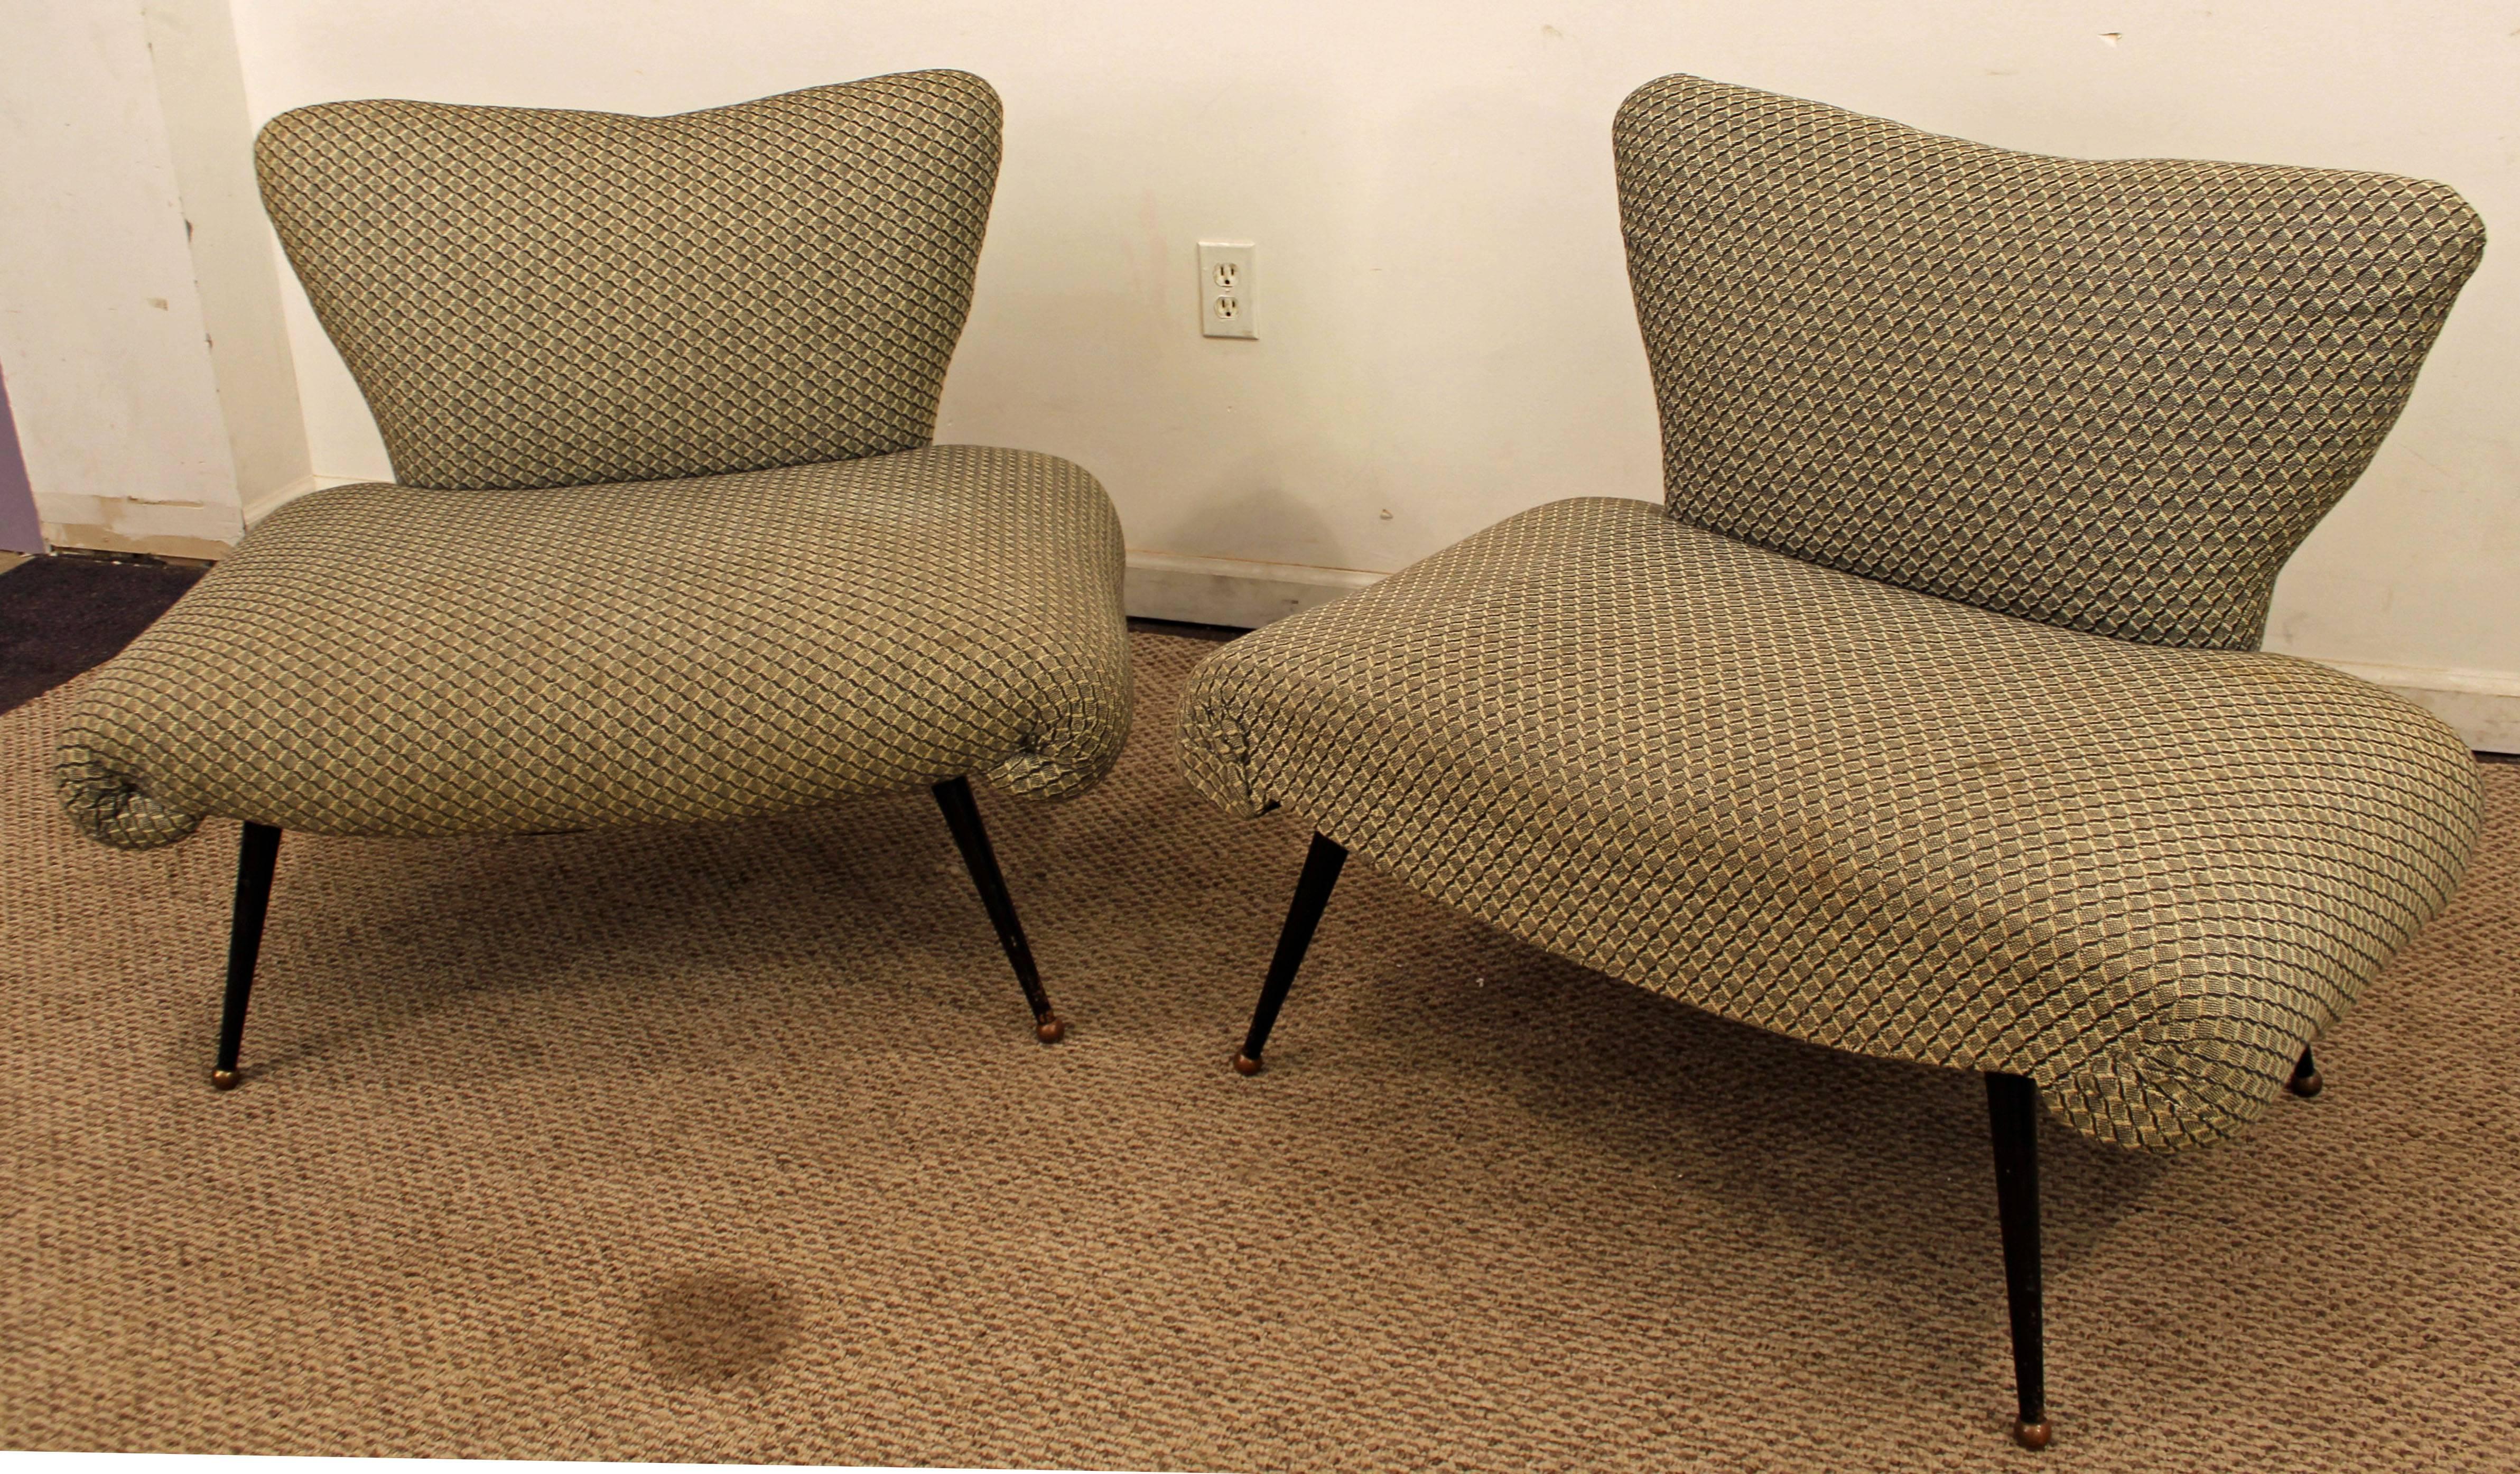 This set includes two lounge chairs, similar to the style of Marco Zanuso. The chairs have the lines and design that scream modern.

Dimensions:
35